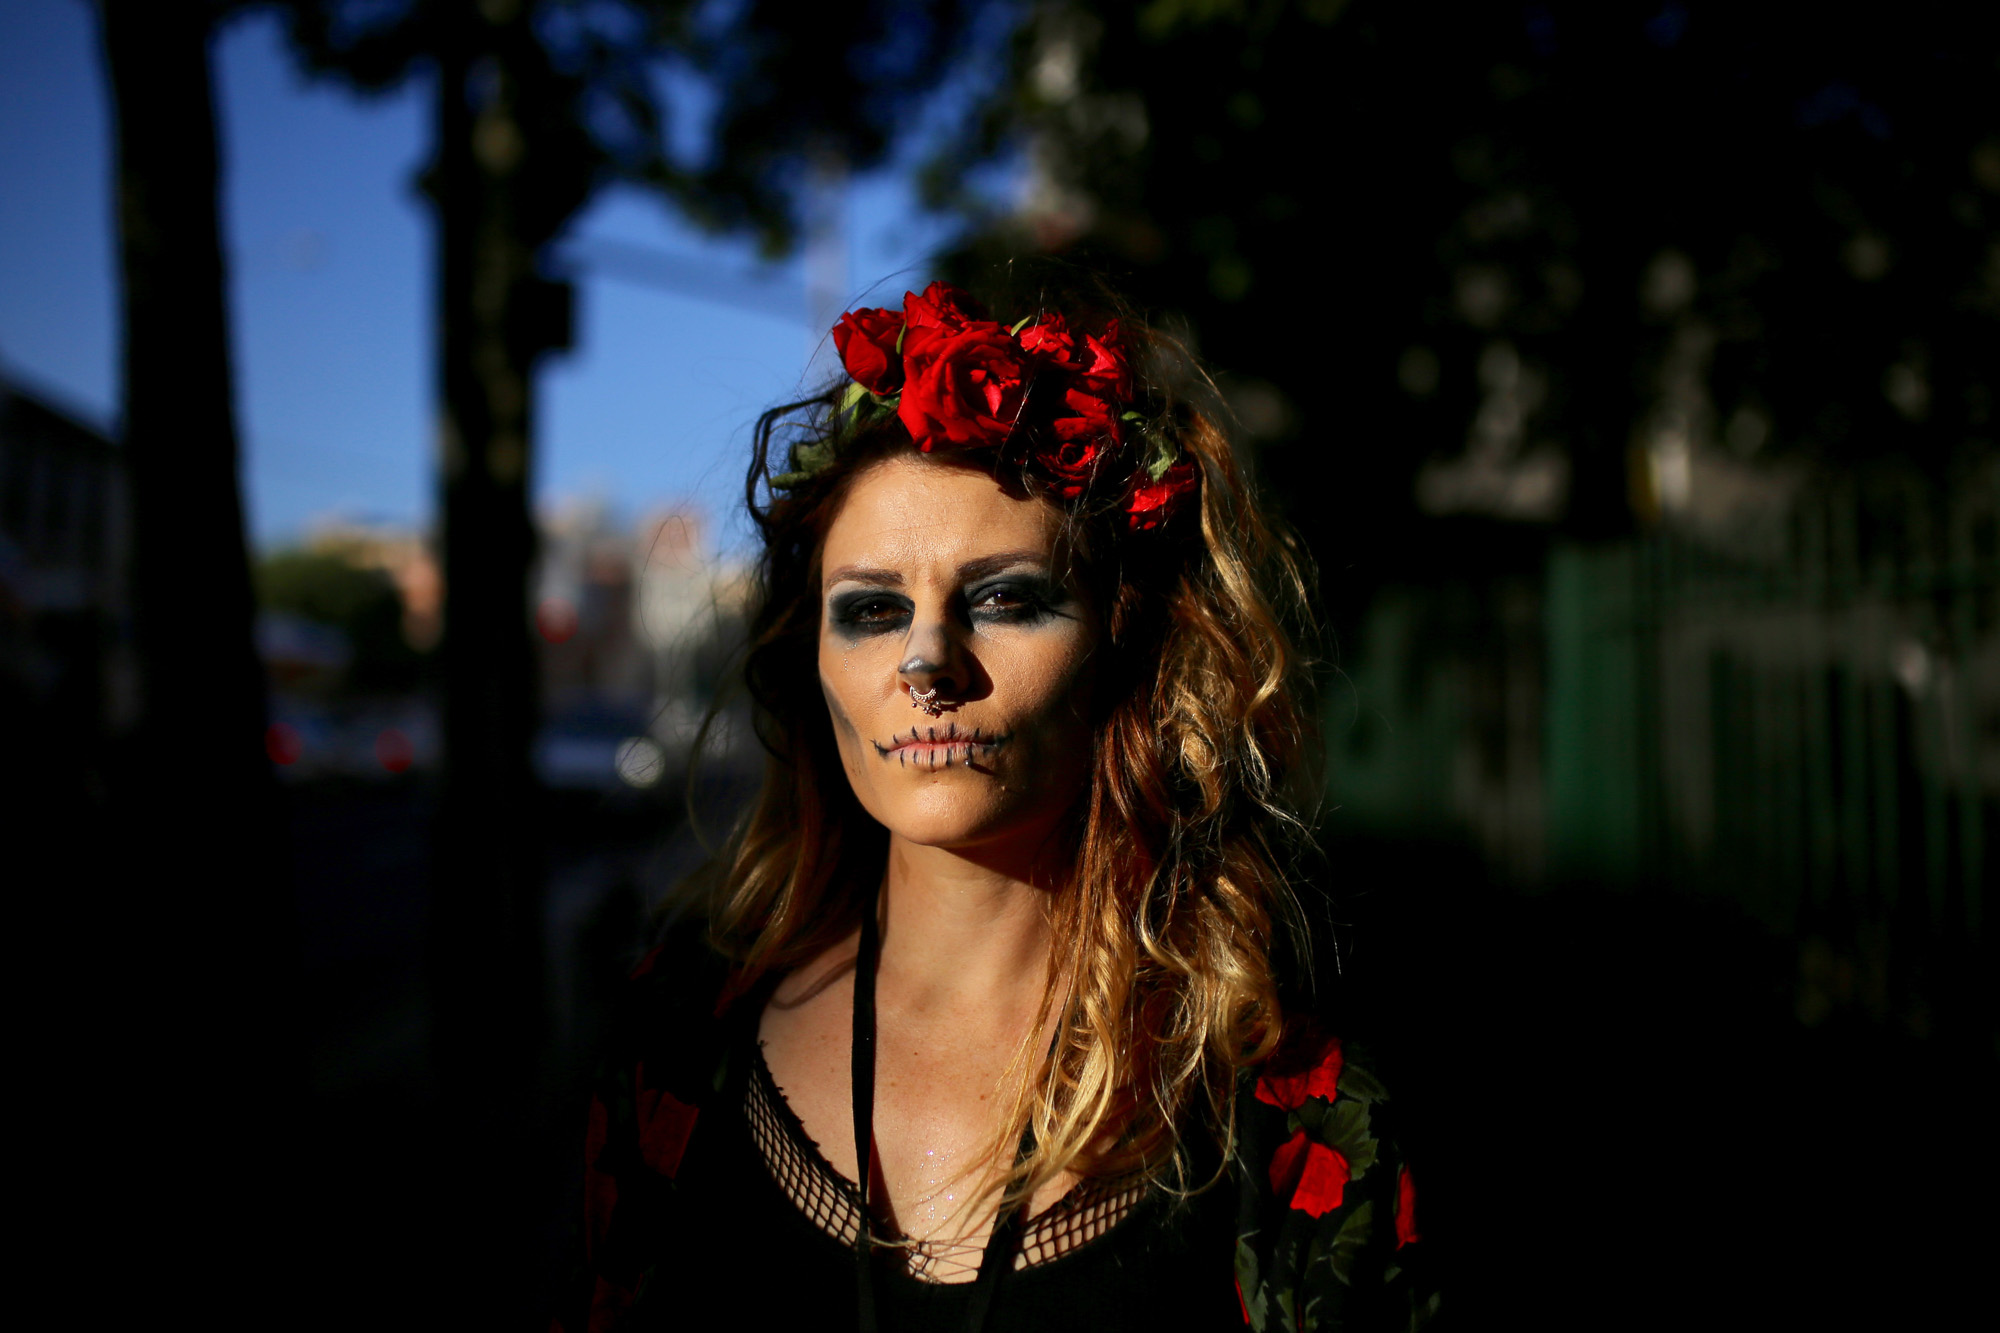  A woman wears makeup resembling a skull for Halloween in Newtown, central Sydney, Australia. 